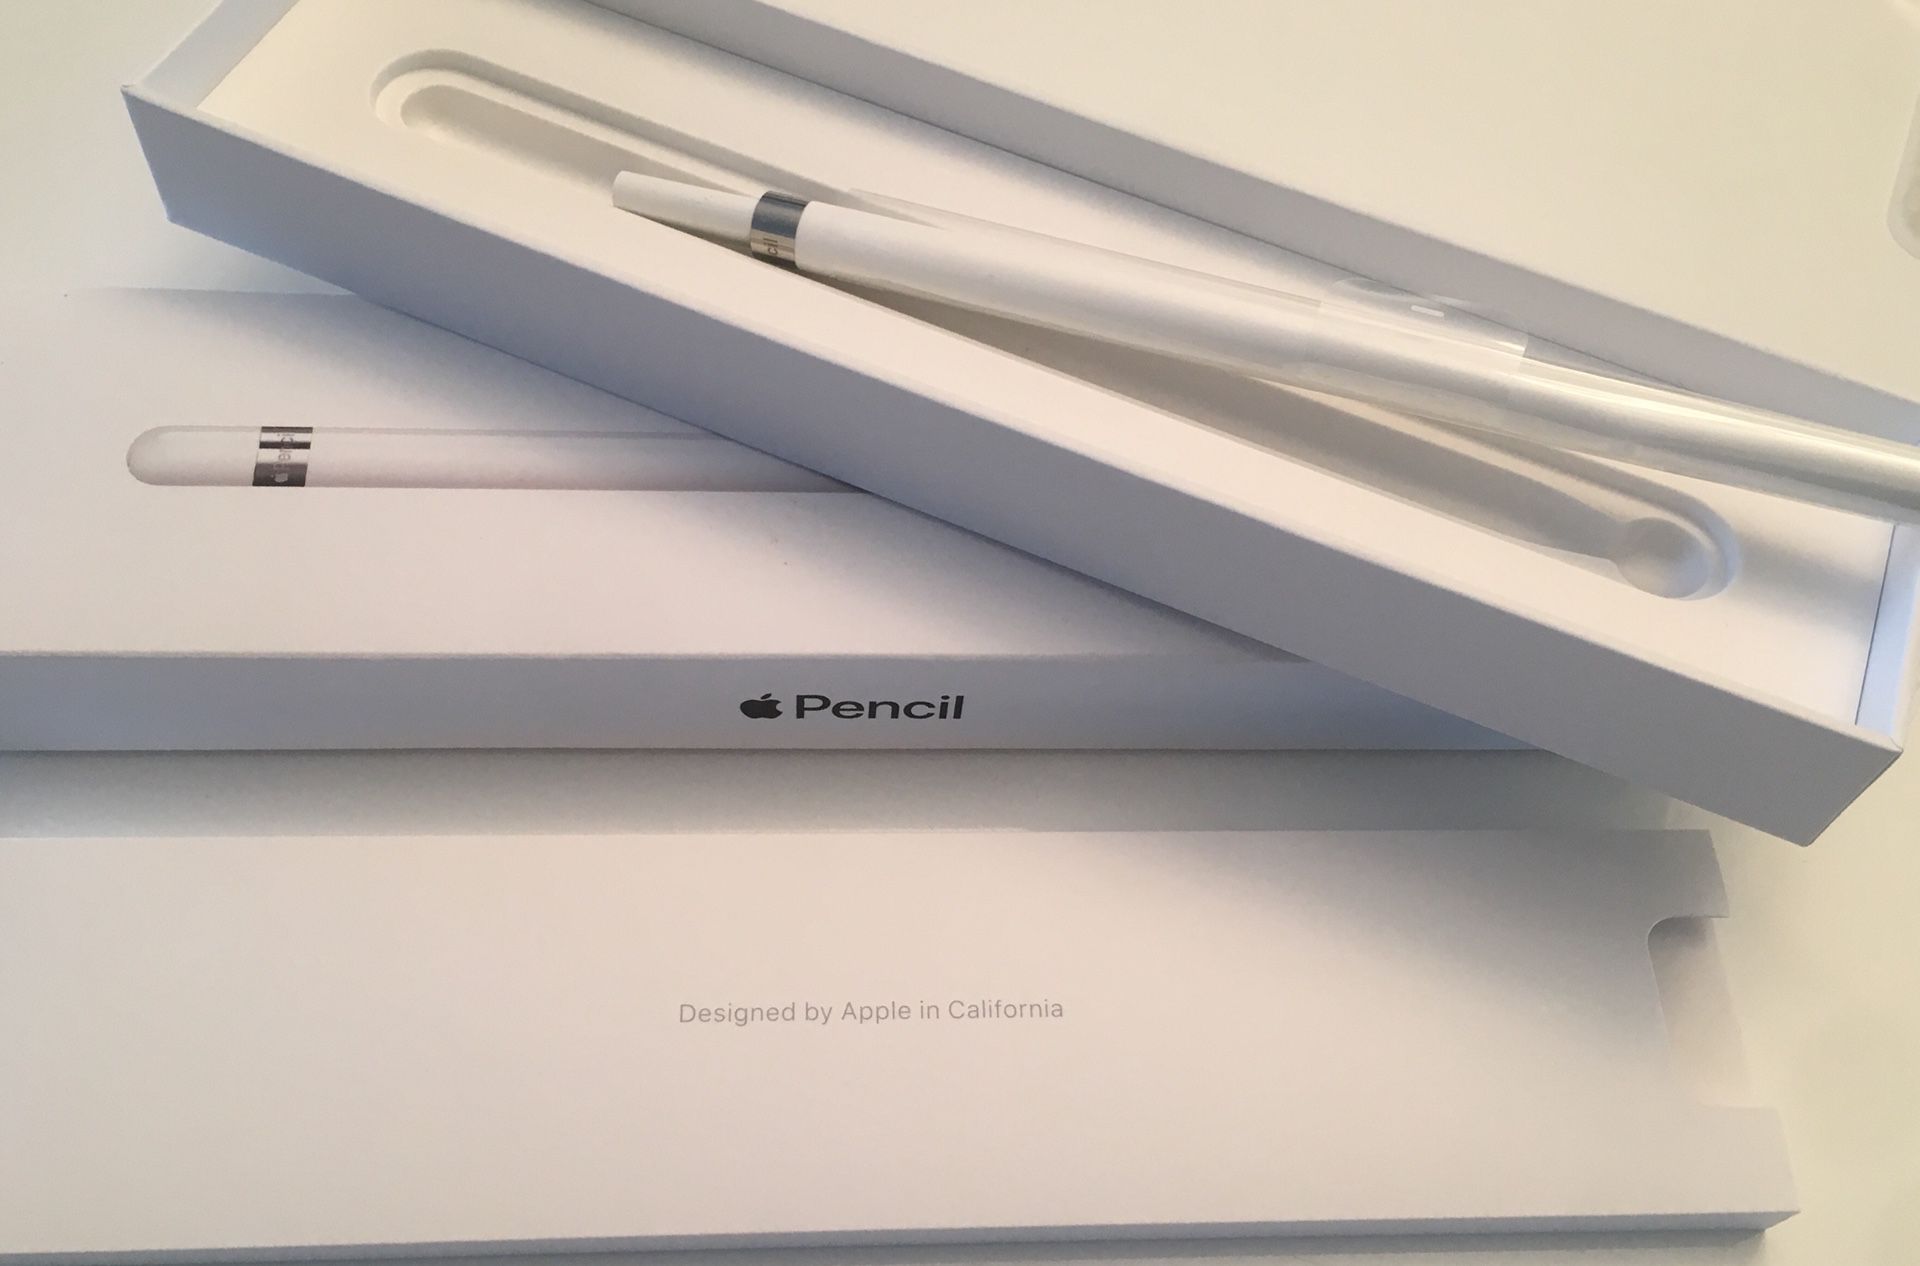 iPad apple pen never used. $85. Brand new. In a box.